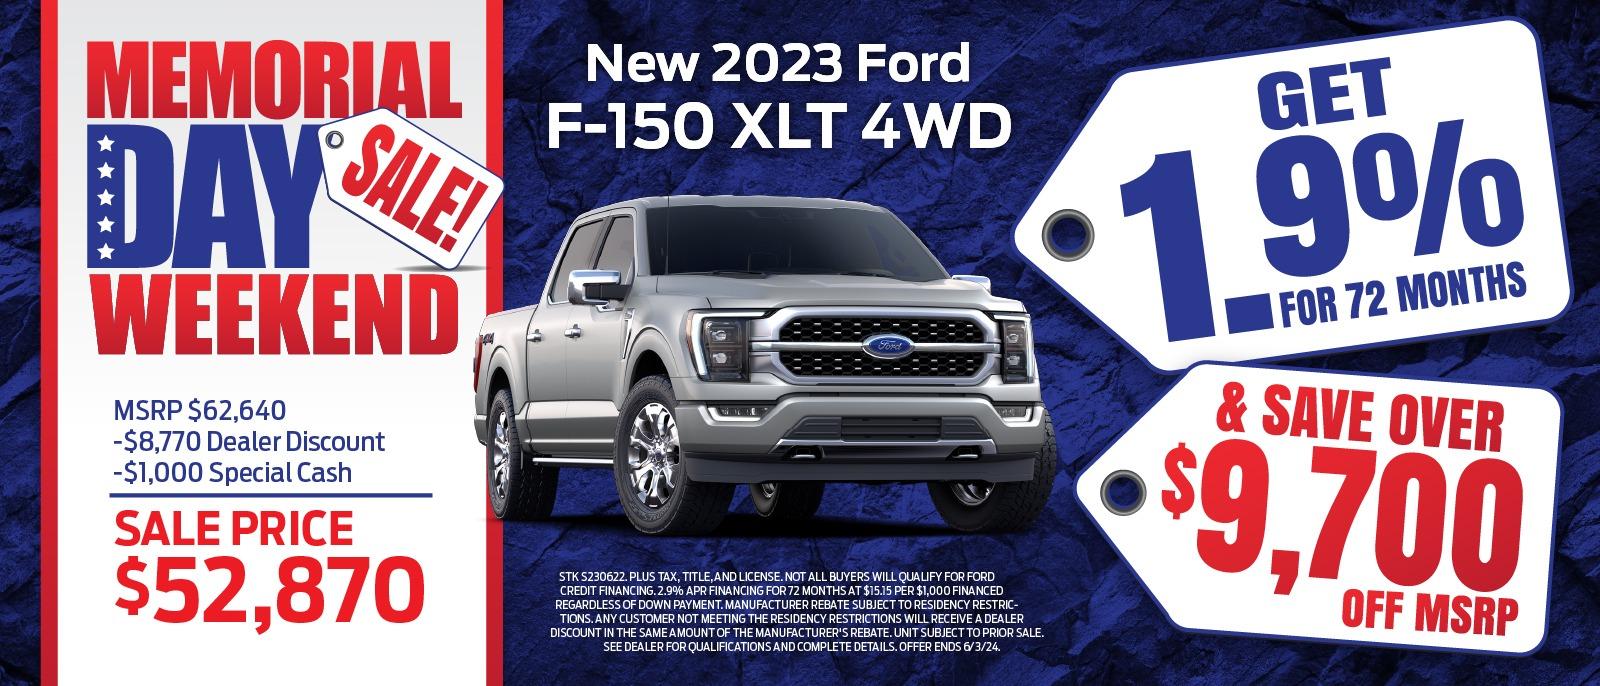 ⭐Memorial Day Sale F-150 Special!⭐